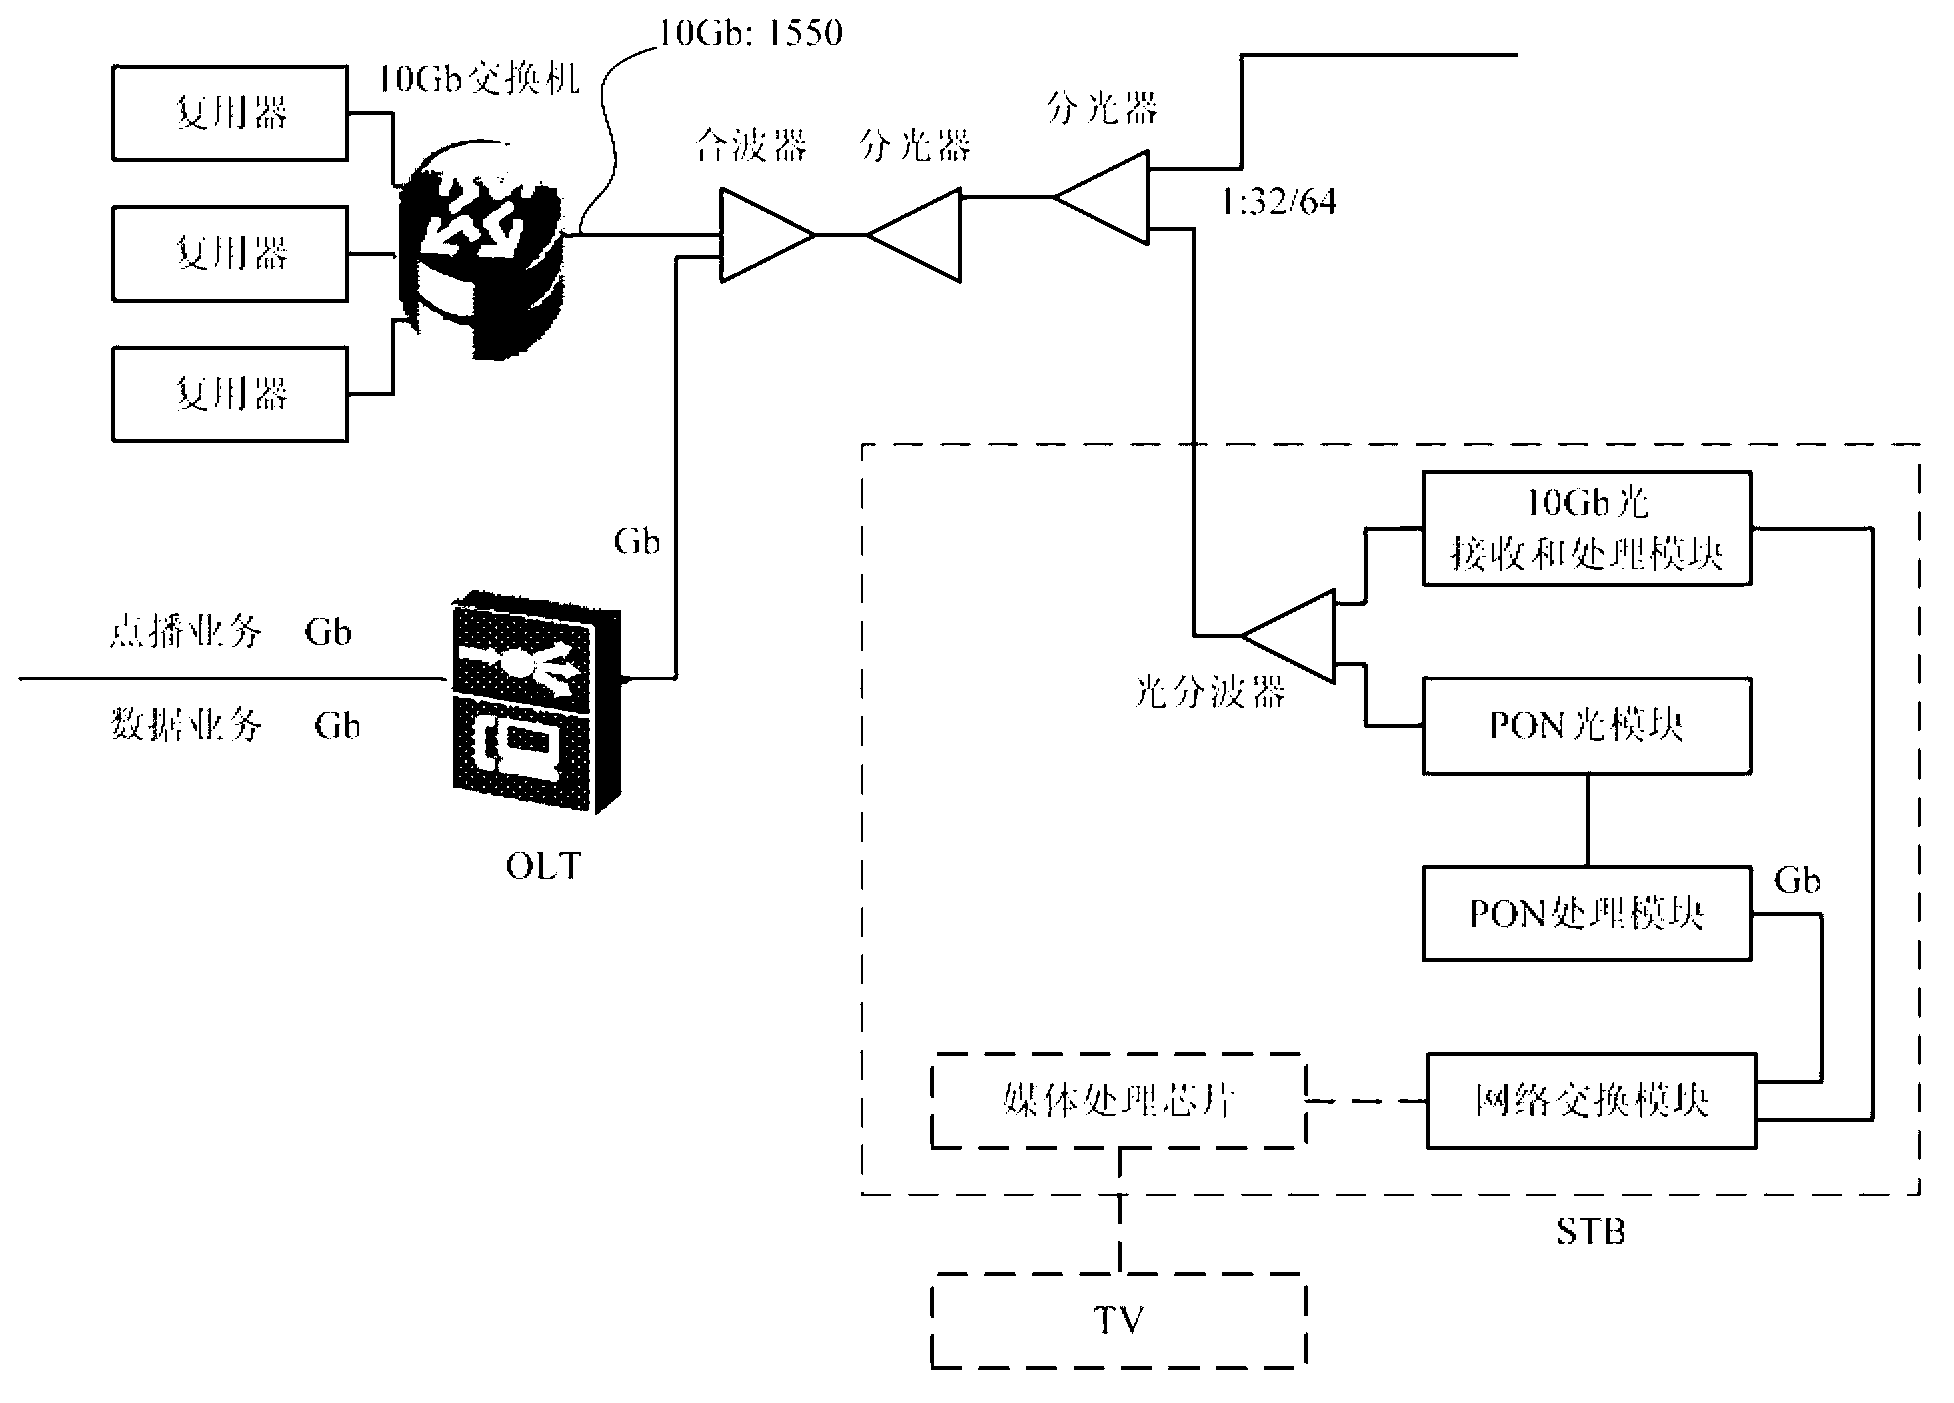 Front data transmission terminal in network data transmission system